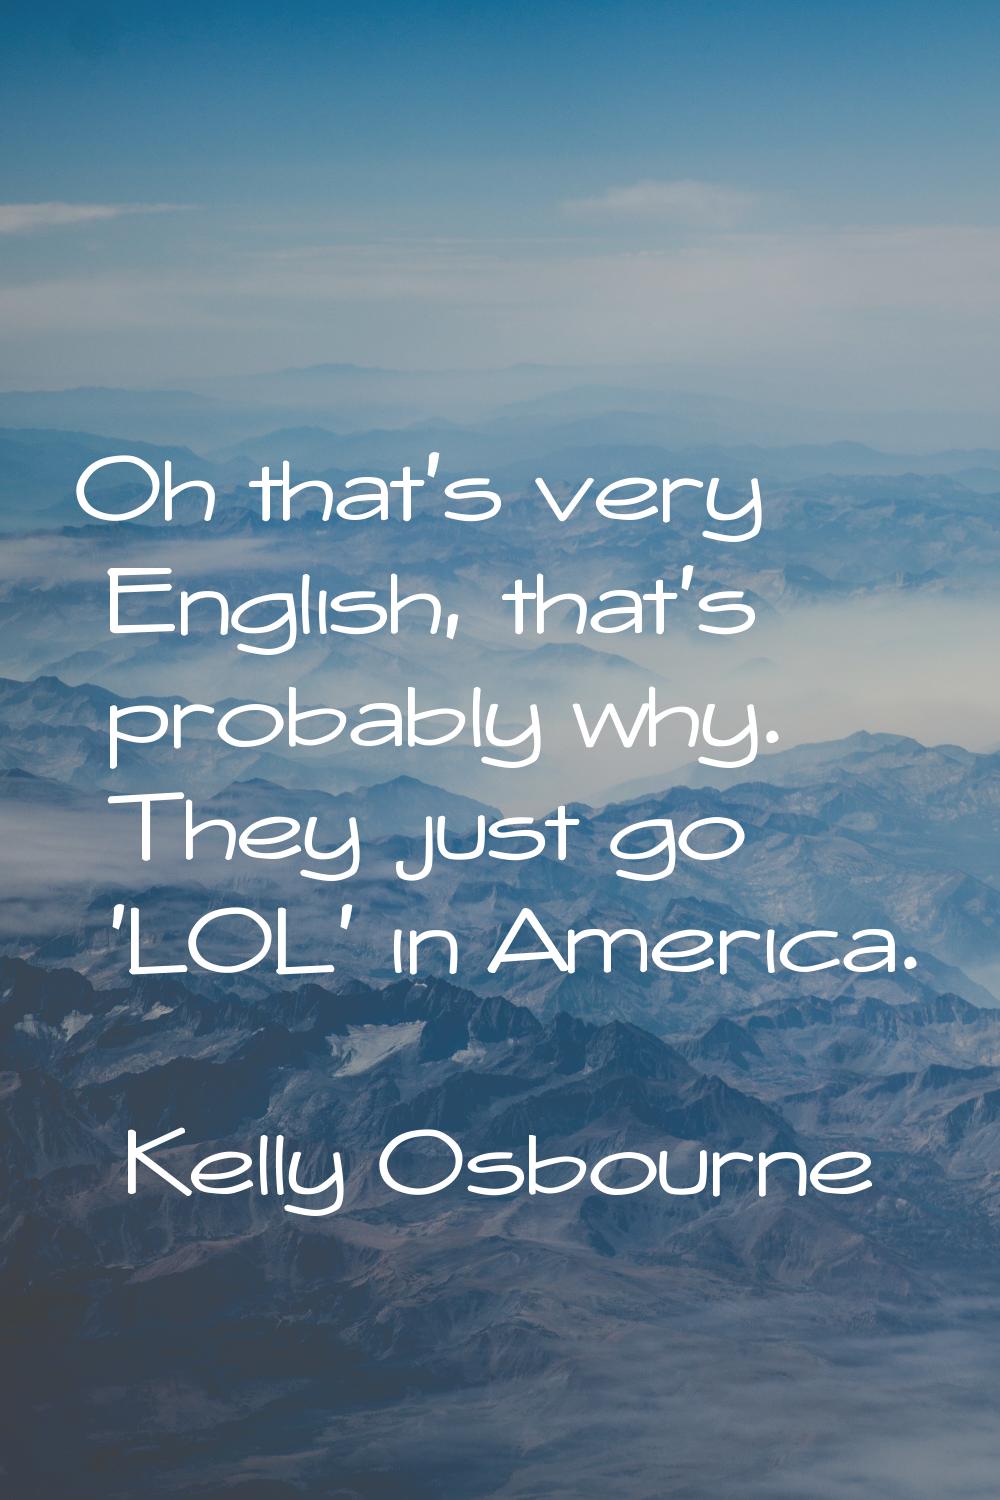 Oh that's very English, that's probably why. They just go 'LOL' in America.